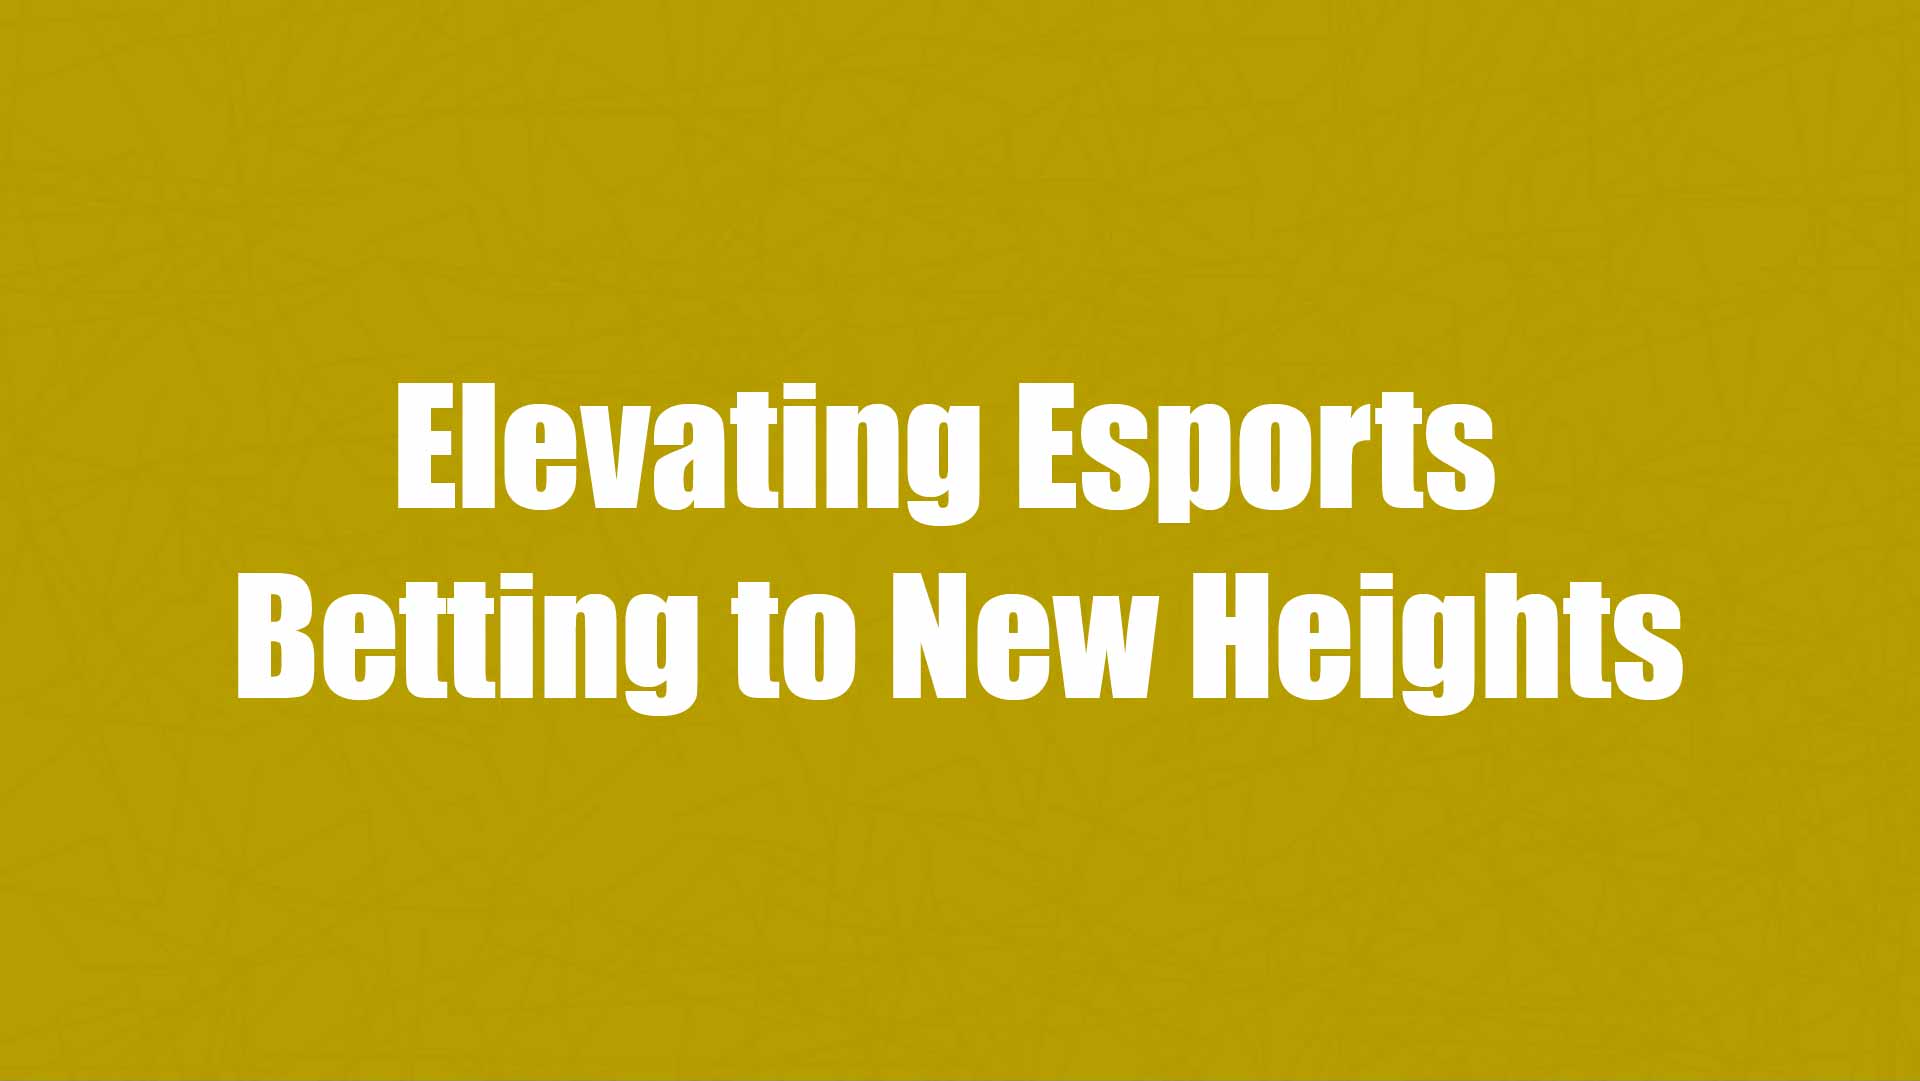 1_Elevating Esports -Betting to New Heights